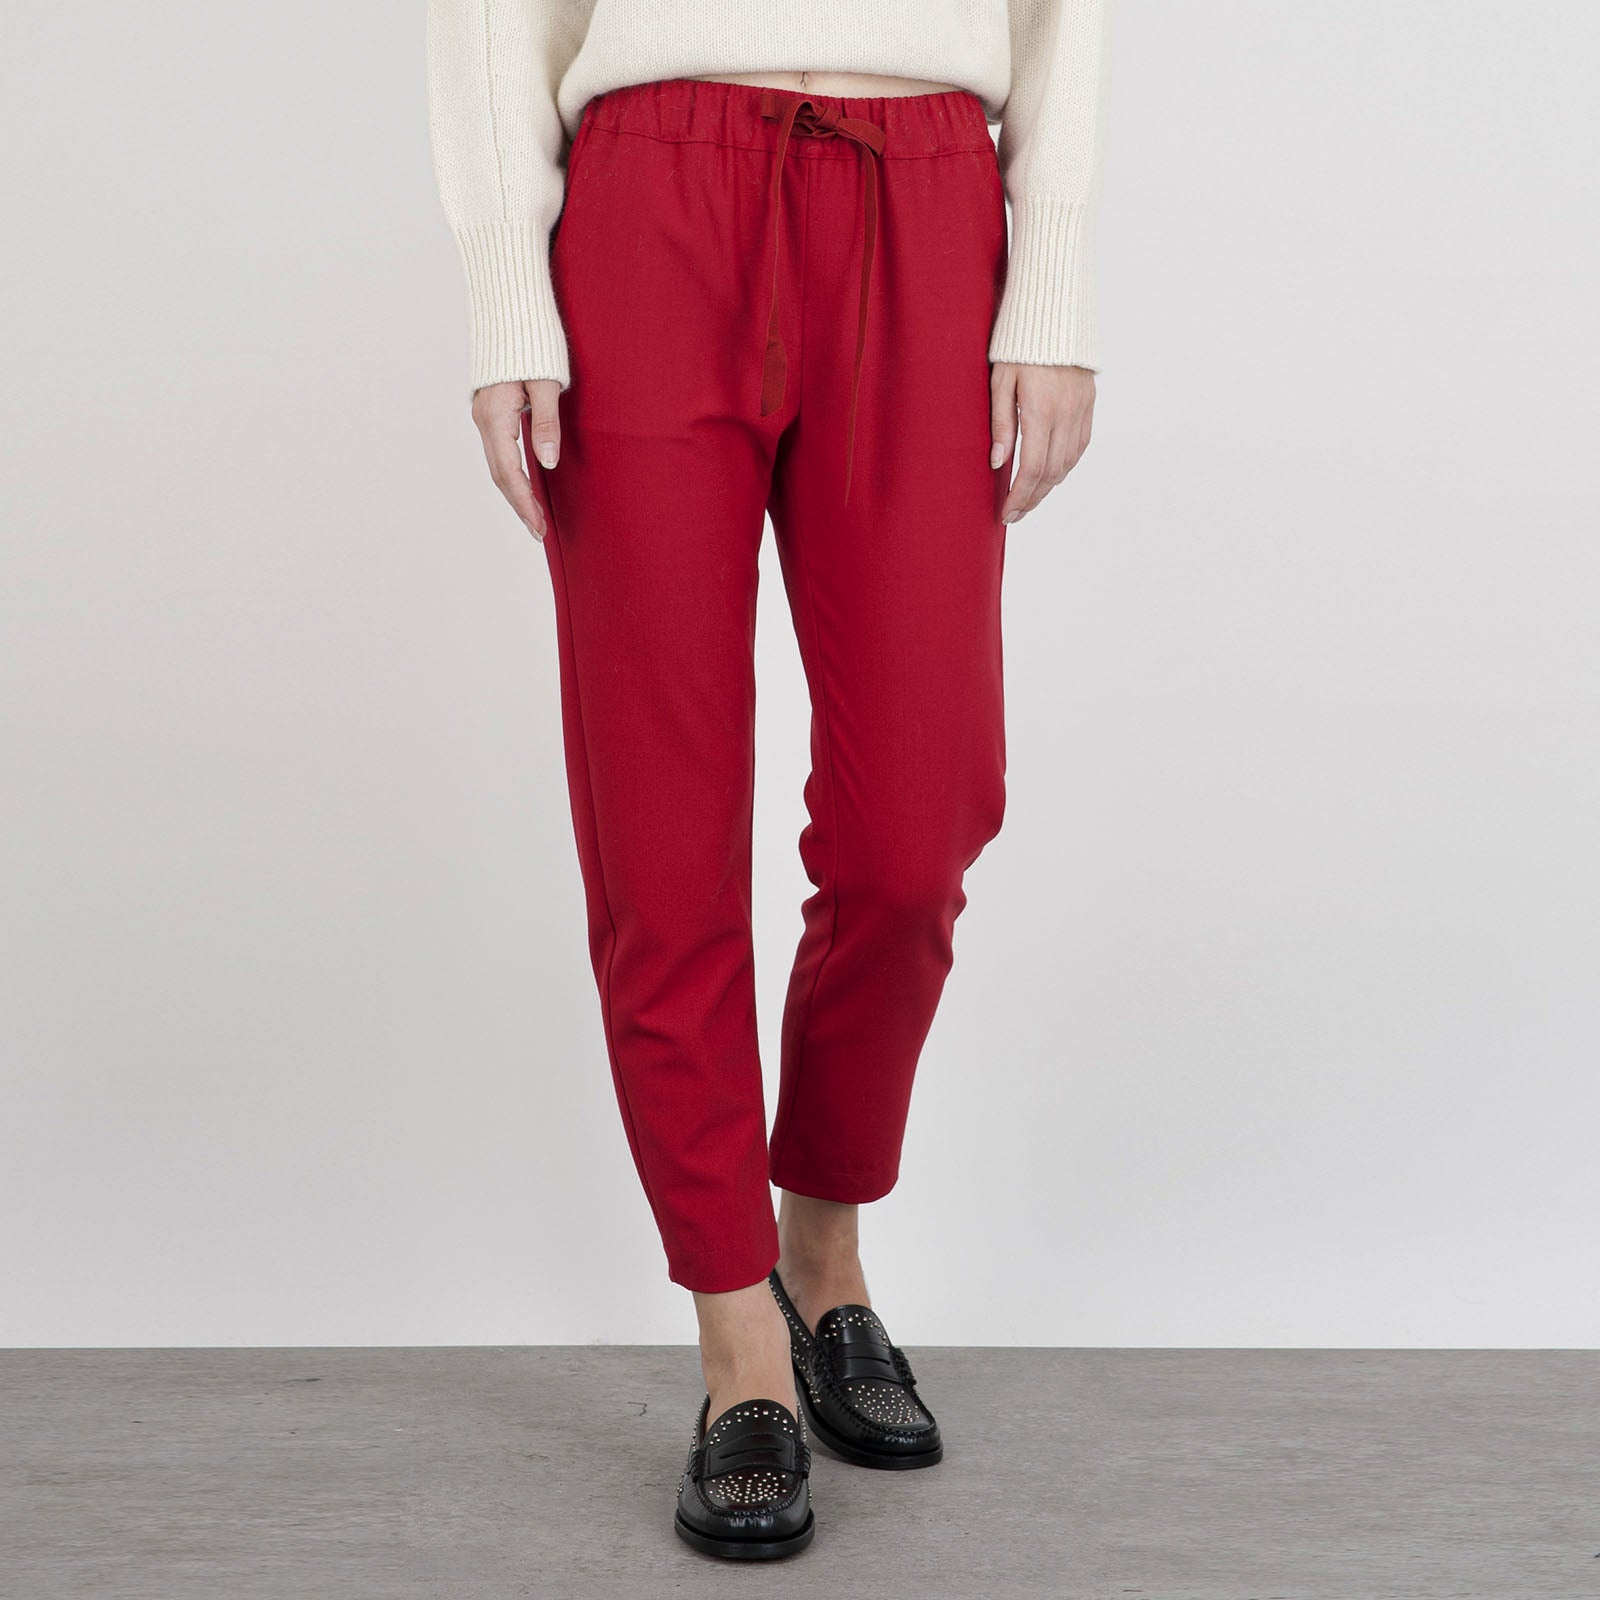 Semicouture Pantalone Buddy Rosso Donna Y3WI18D15 - 6